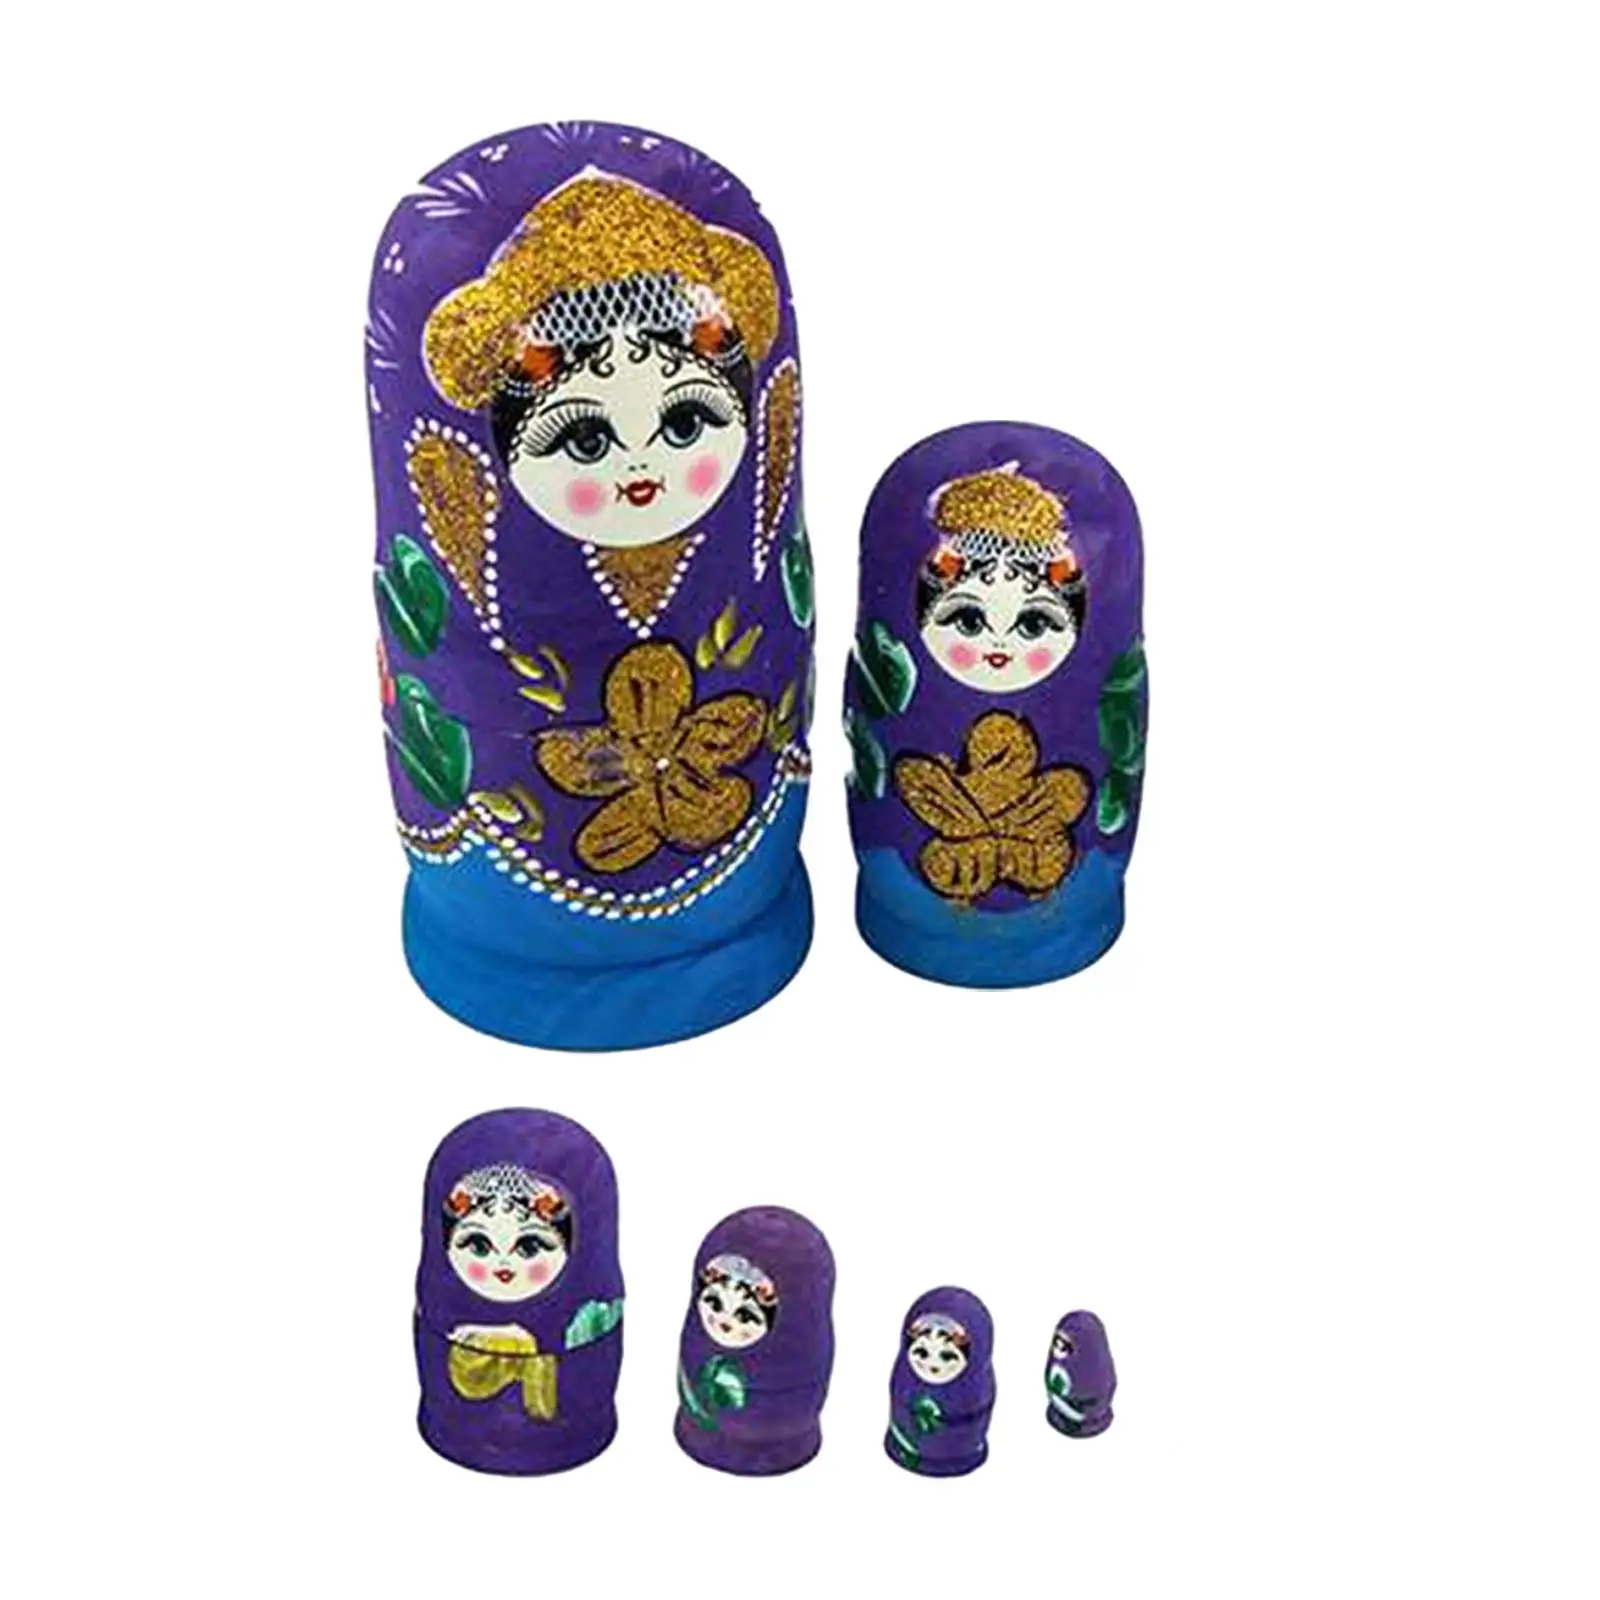 7Pcs Nesting Doll, Matryoshka Dolls, Collectible Crafts, Stackable Nesting Wishing Dolls for Birthday, Table Office